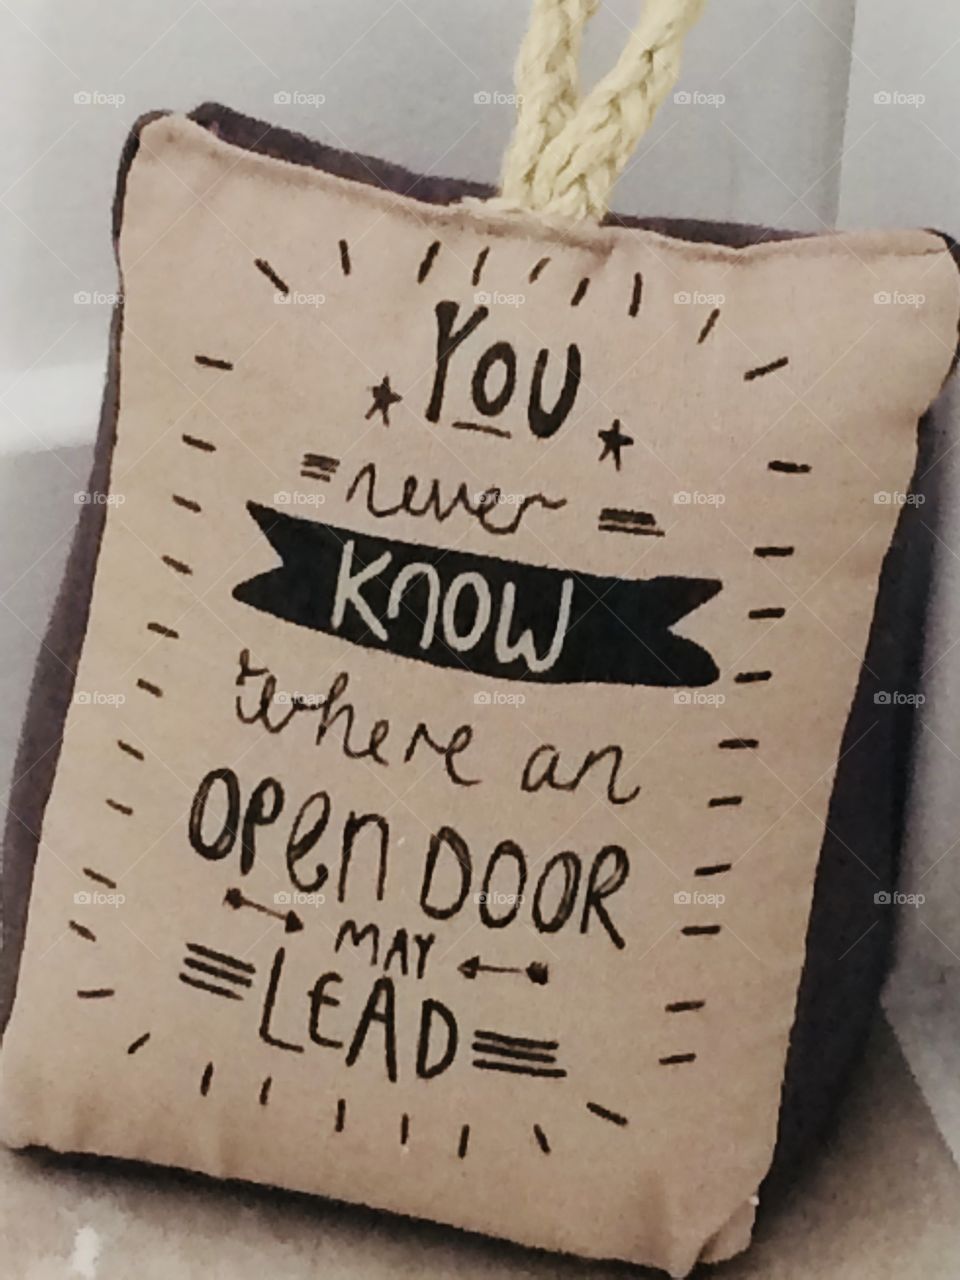 You Never Know Where an Open Door May Lead